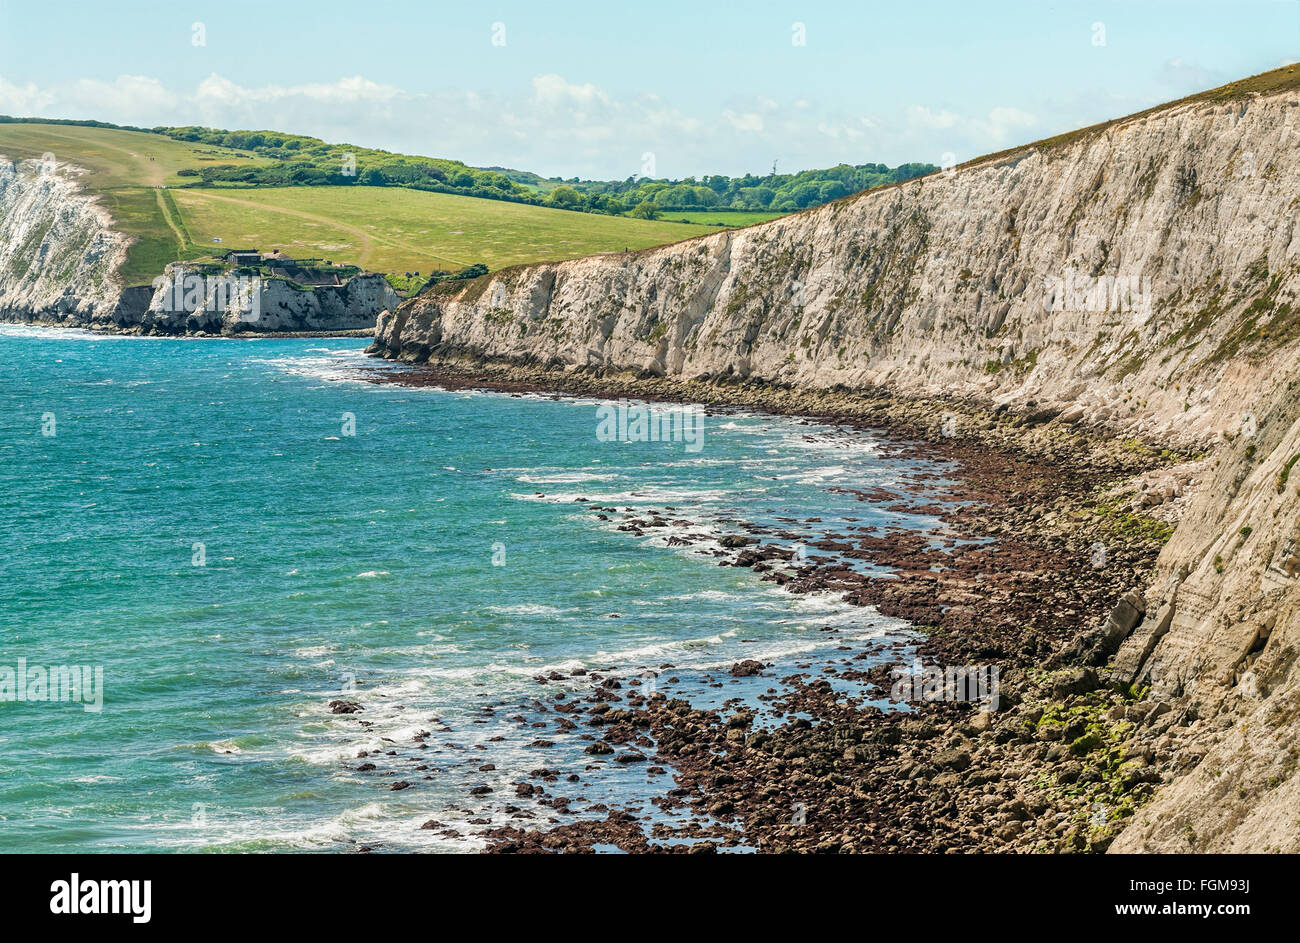 Costal landscape between Freshwater Bay and Crompton Bay at the southern coast of the Isle of Wight, England Stock Photo